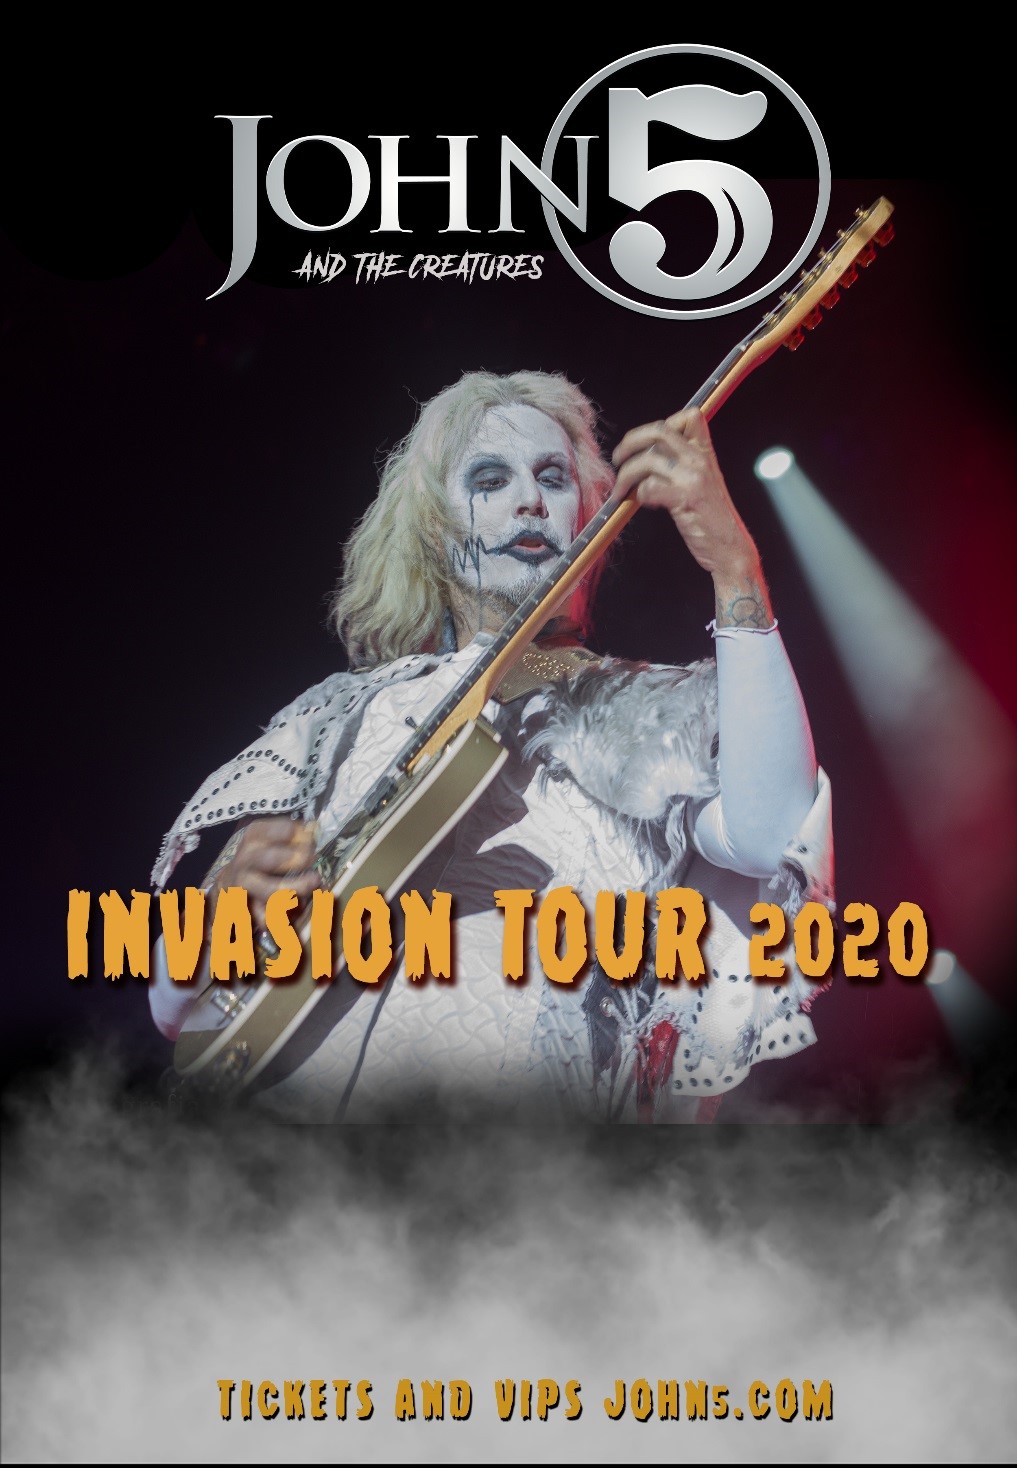 JOHN 5 and The Creatures Confirm 2020 Tour with Queensryche